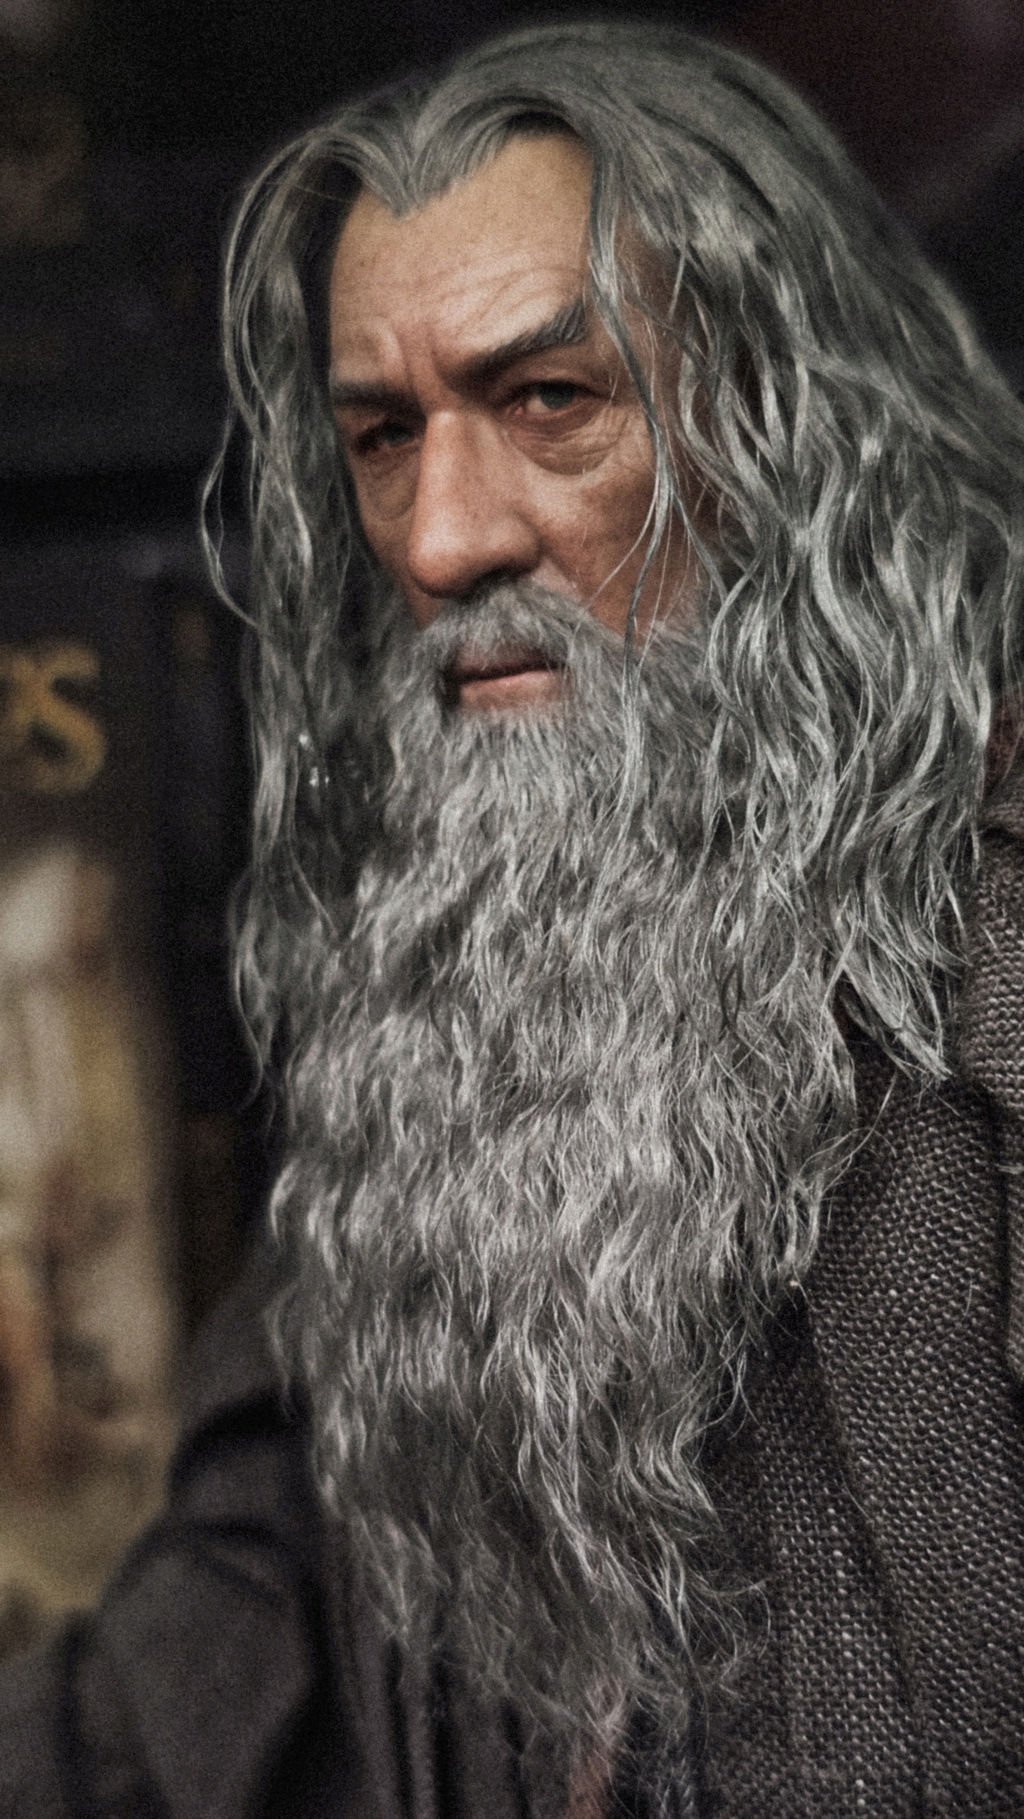 InArt - NEW PRODUCT: Queen Studios & INART: 1/6 The Lord of the Rings Gandalf (Grey Robe) Action Figure - Page 4 47716110